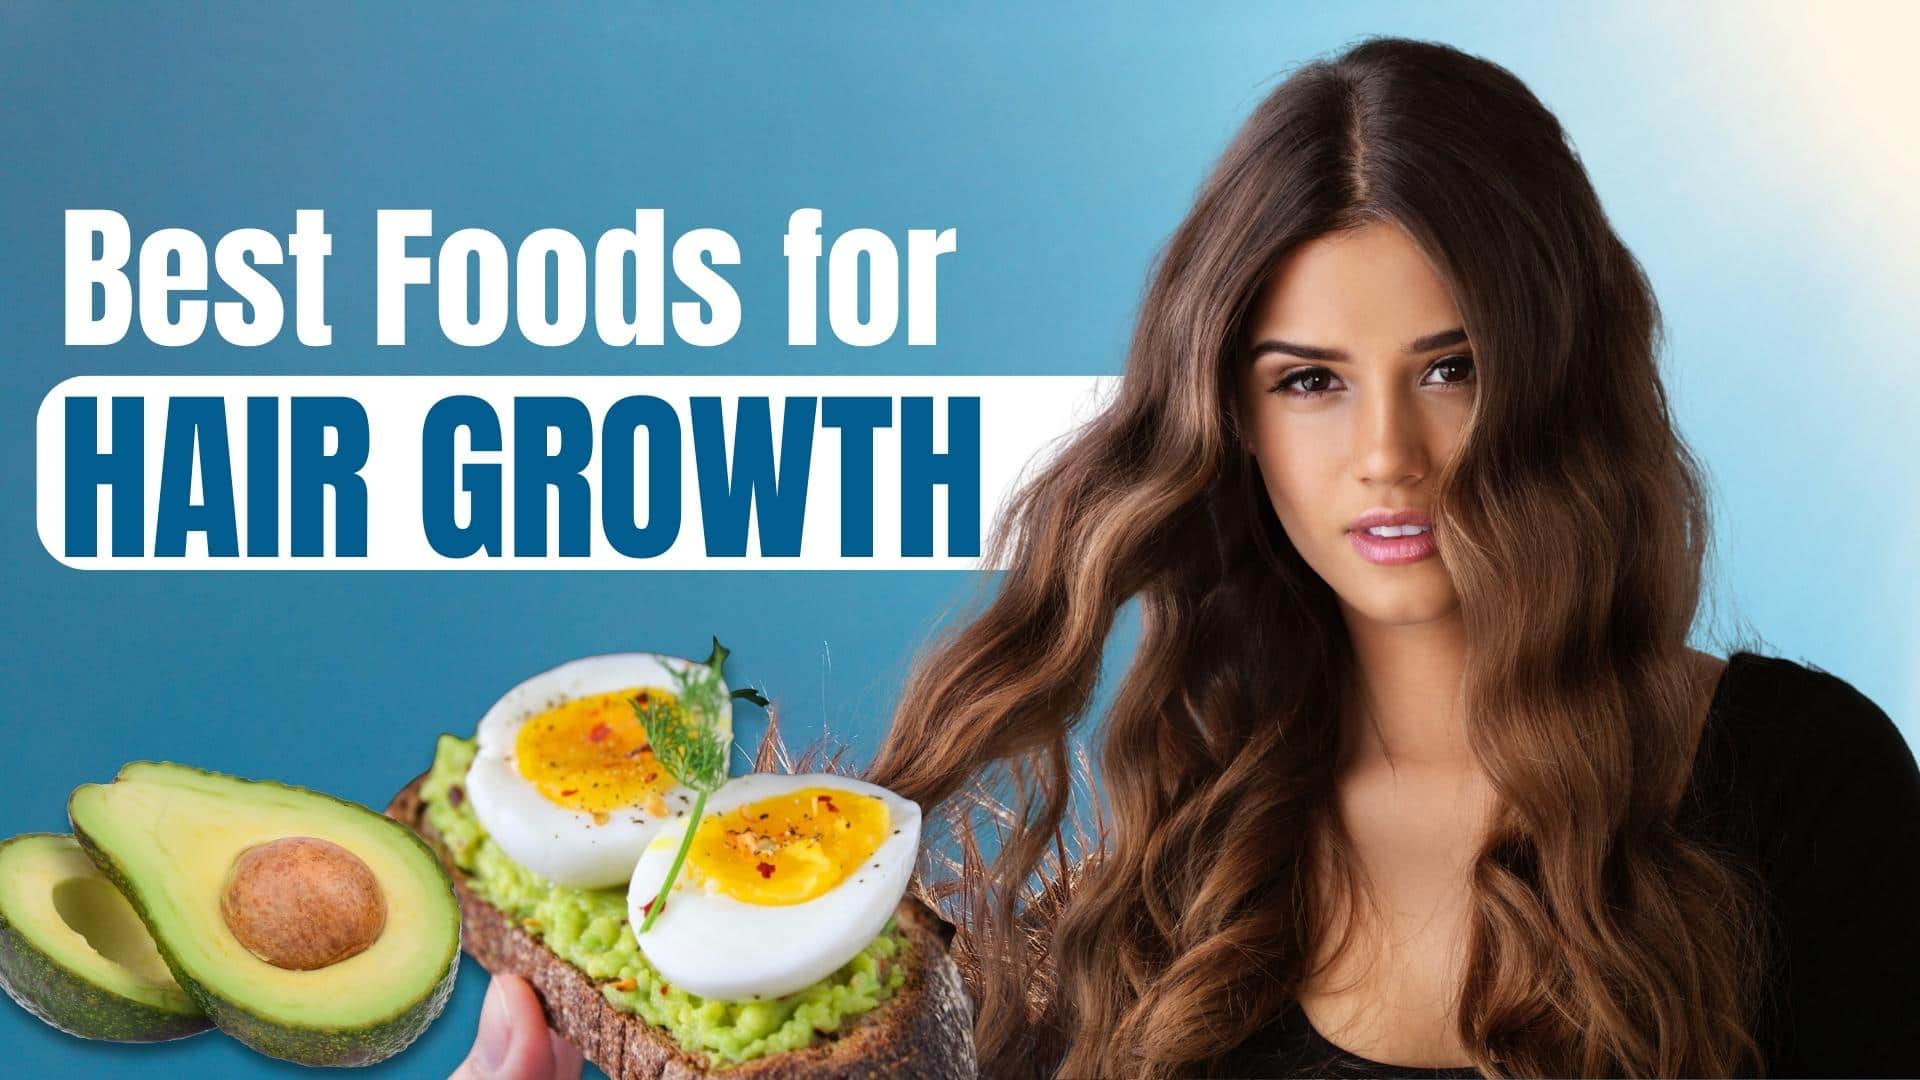 Hair Growth Foods : Eat These Foods For Rapid Hair Growth ...